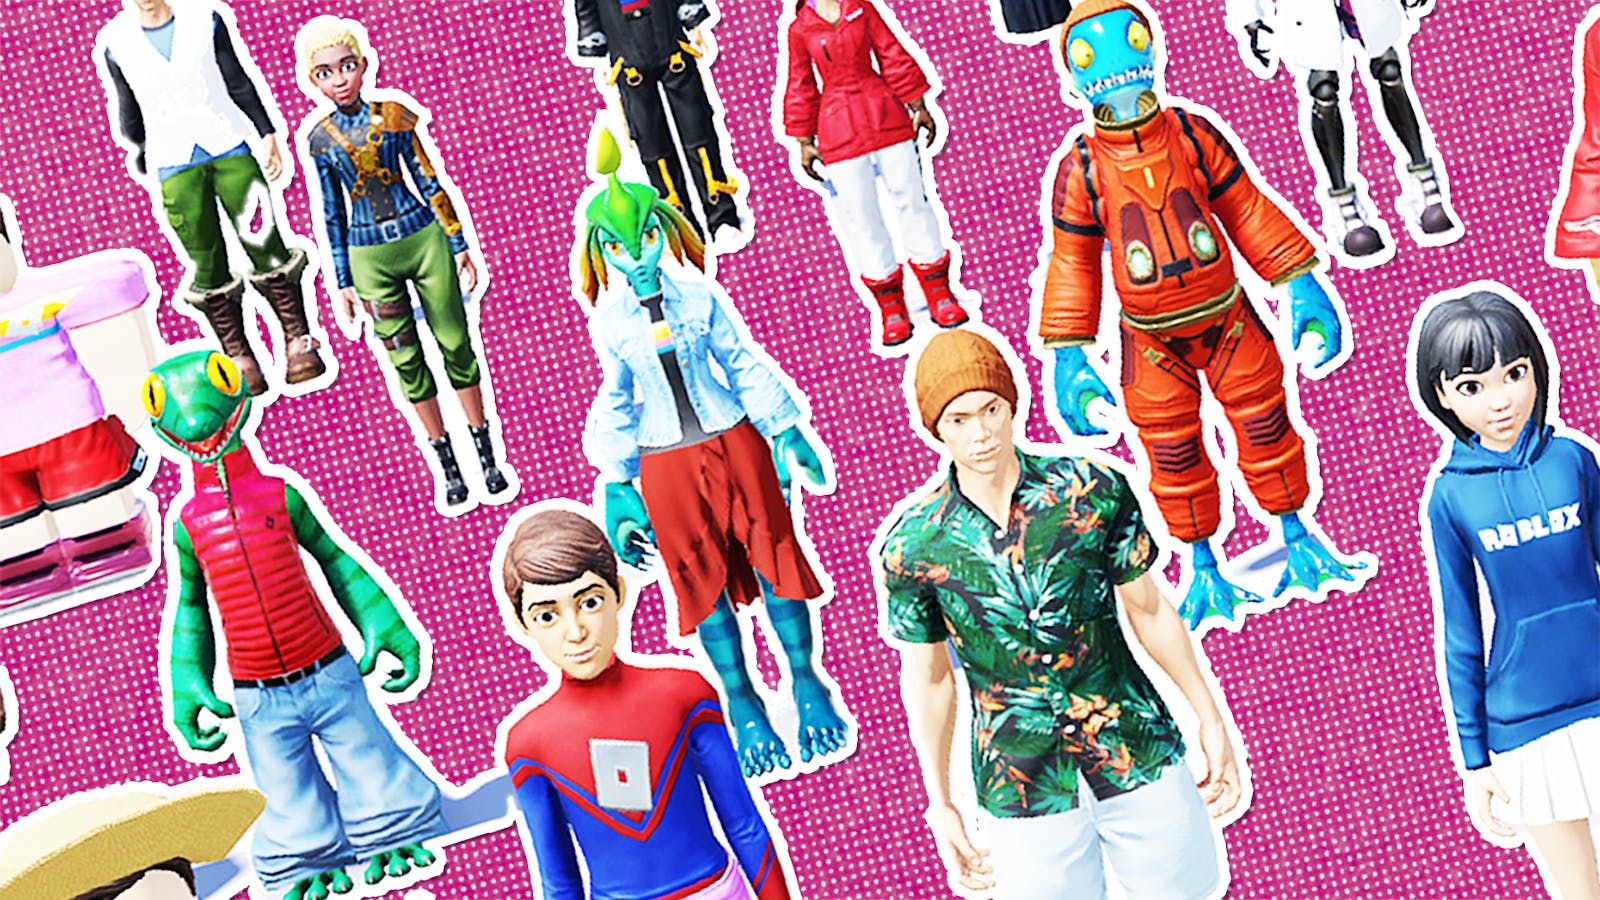 At Roblox's developer conference, the company said creators can now create and sell their own items for avatars, such as hats and clothing. Photo: Roblox